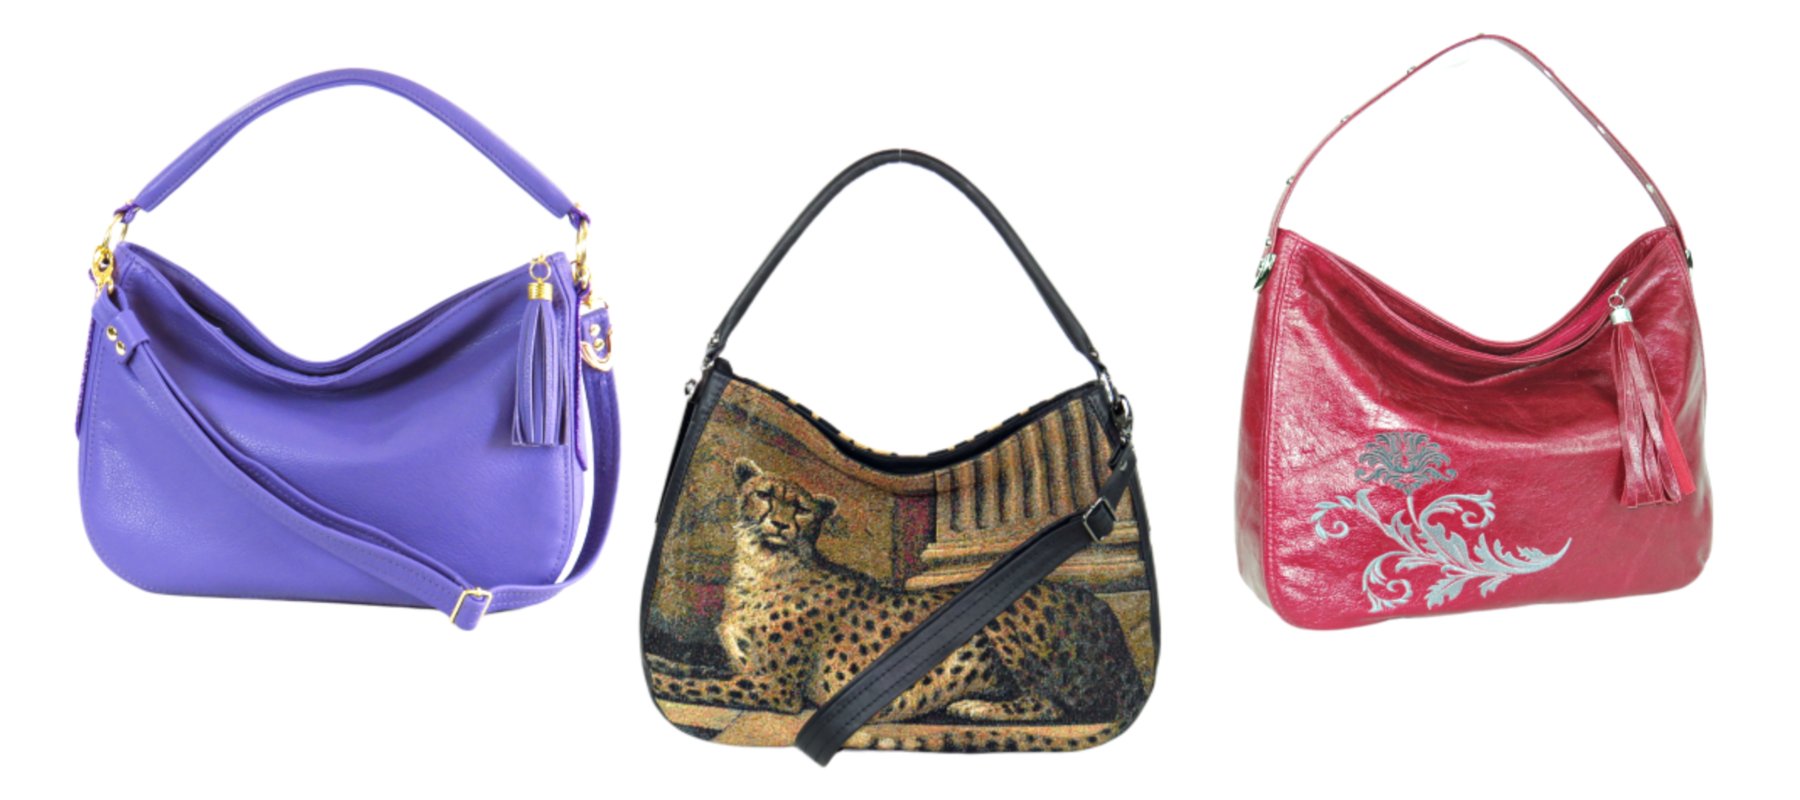 Genuine leather and tapestry Slouch Handbags made in USA